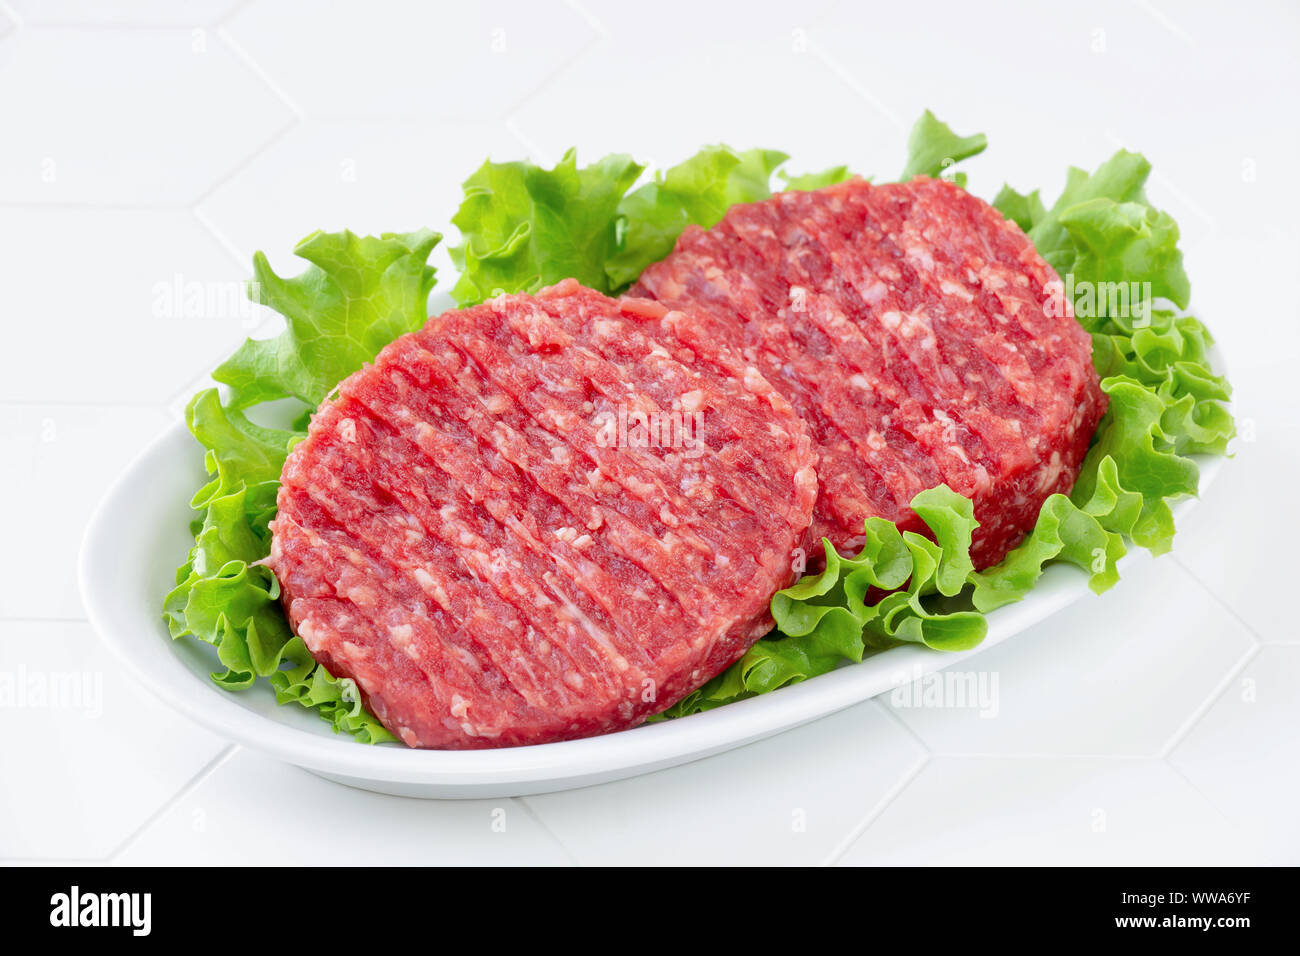 Raw mince meat beef burgers on a white plate Stock Photo